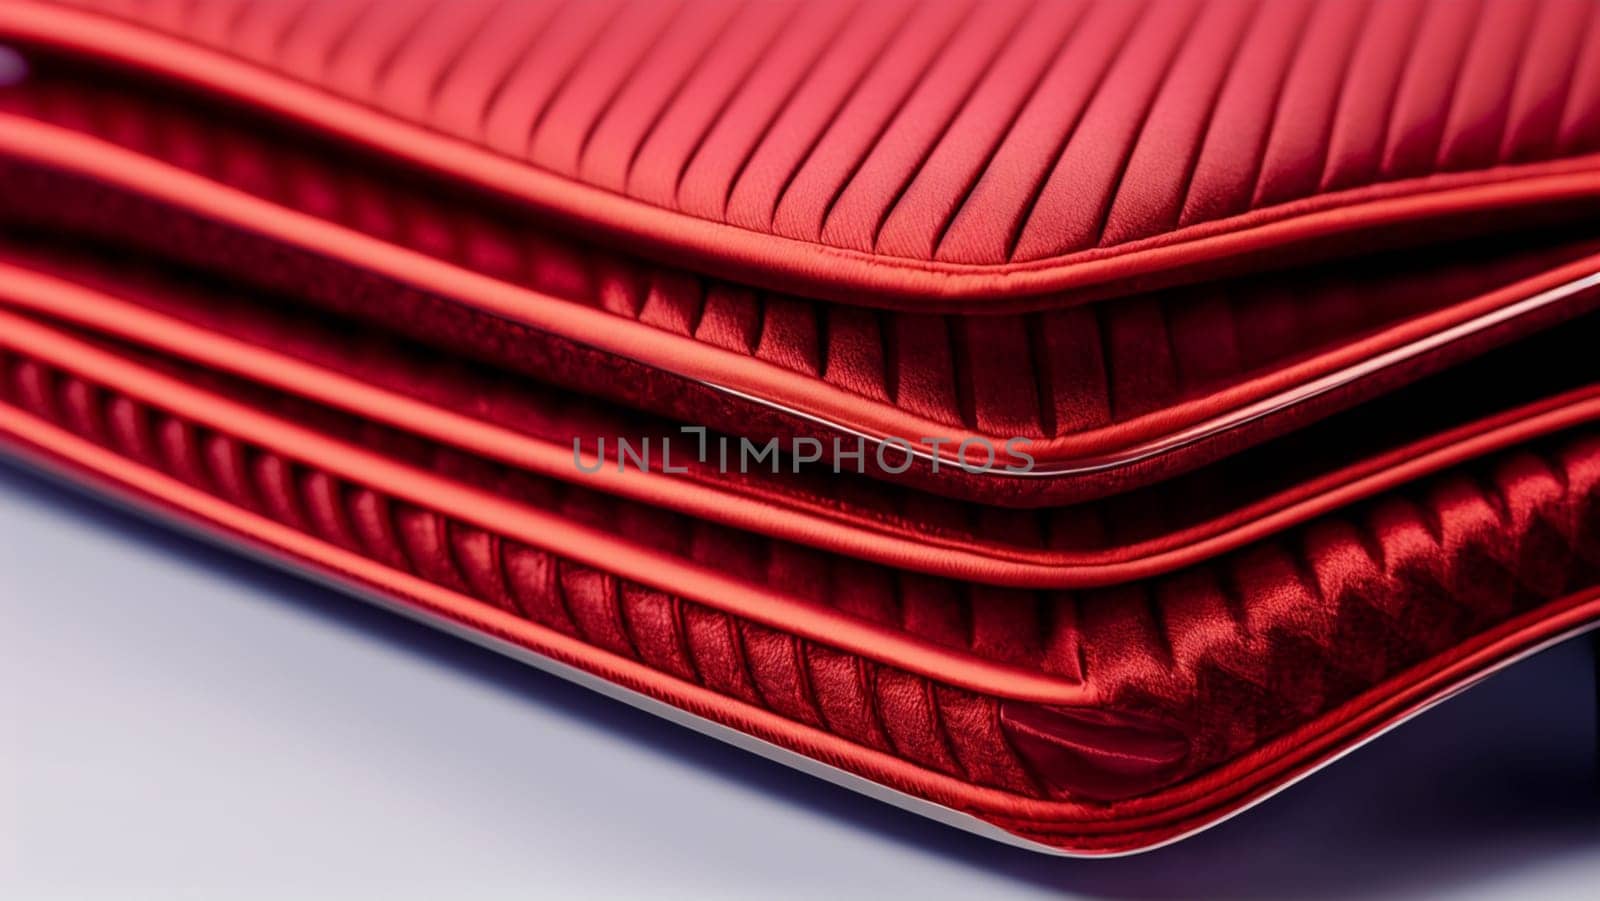 Detail of a red textile quilted cover, bag for laptop or tablet. by XabiDonostia